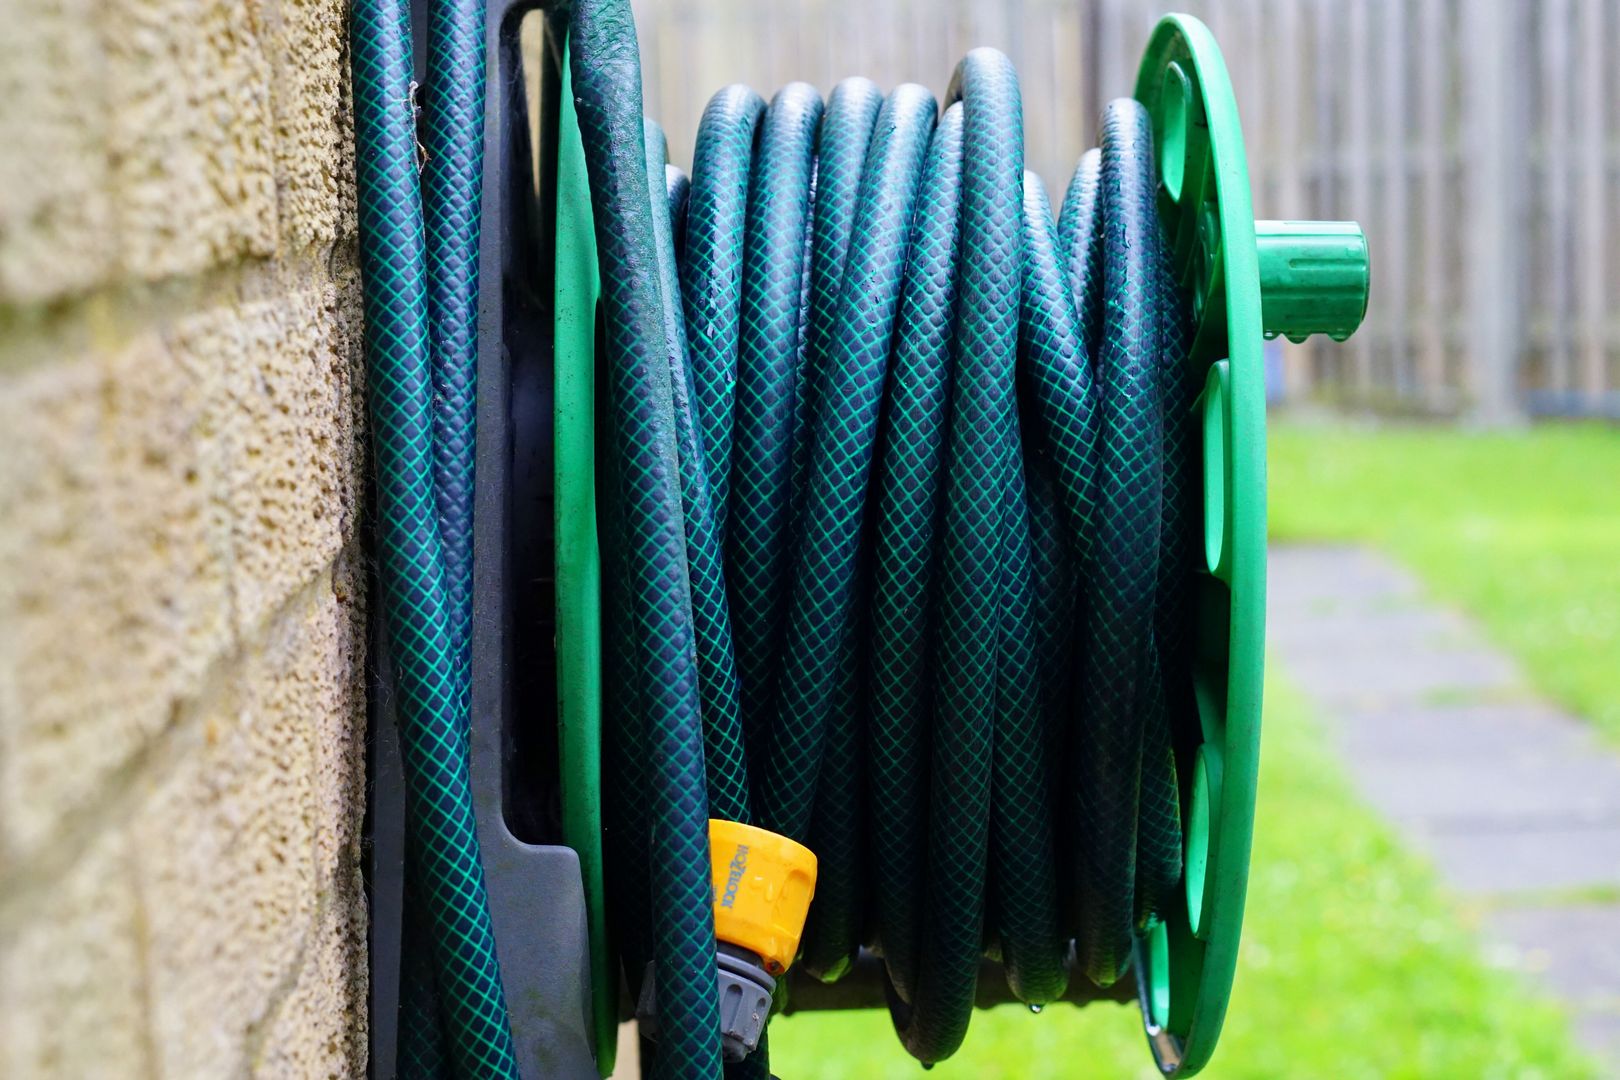 Unscrew your hoses from all outdoor spigots and store them indoors.